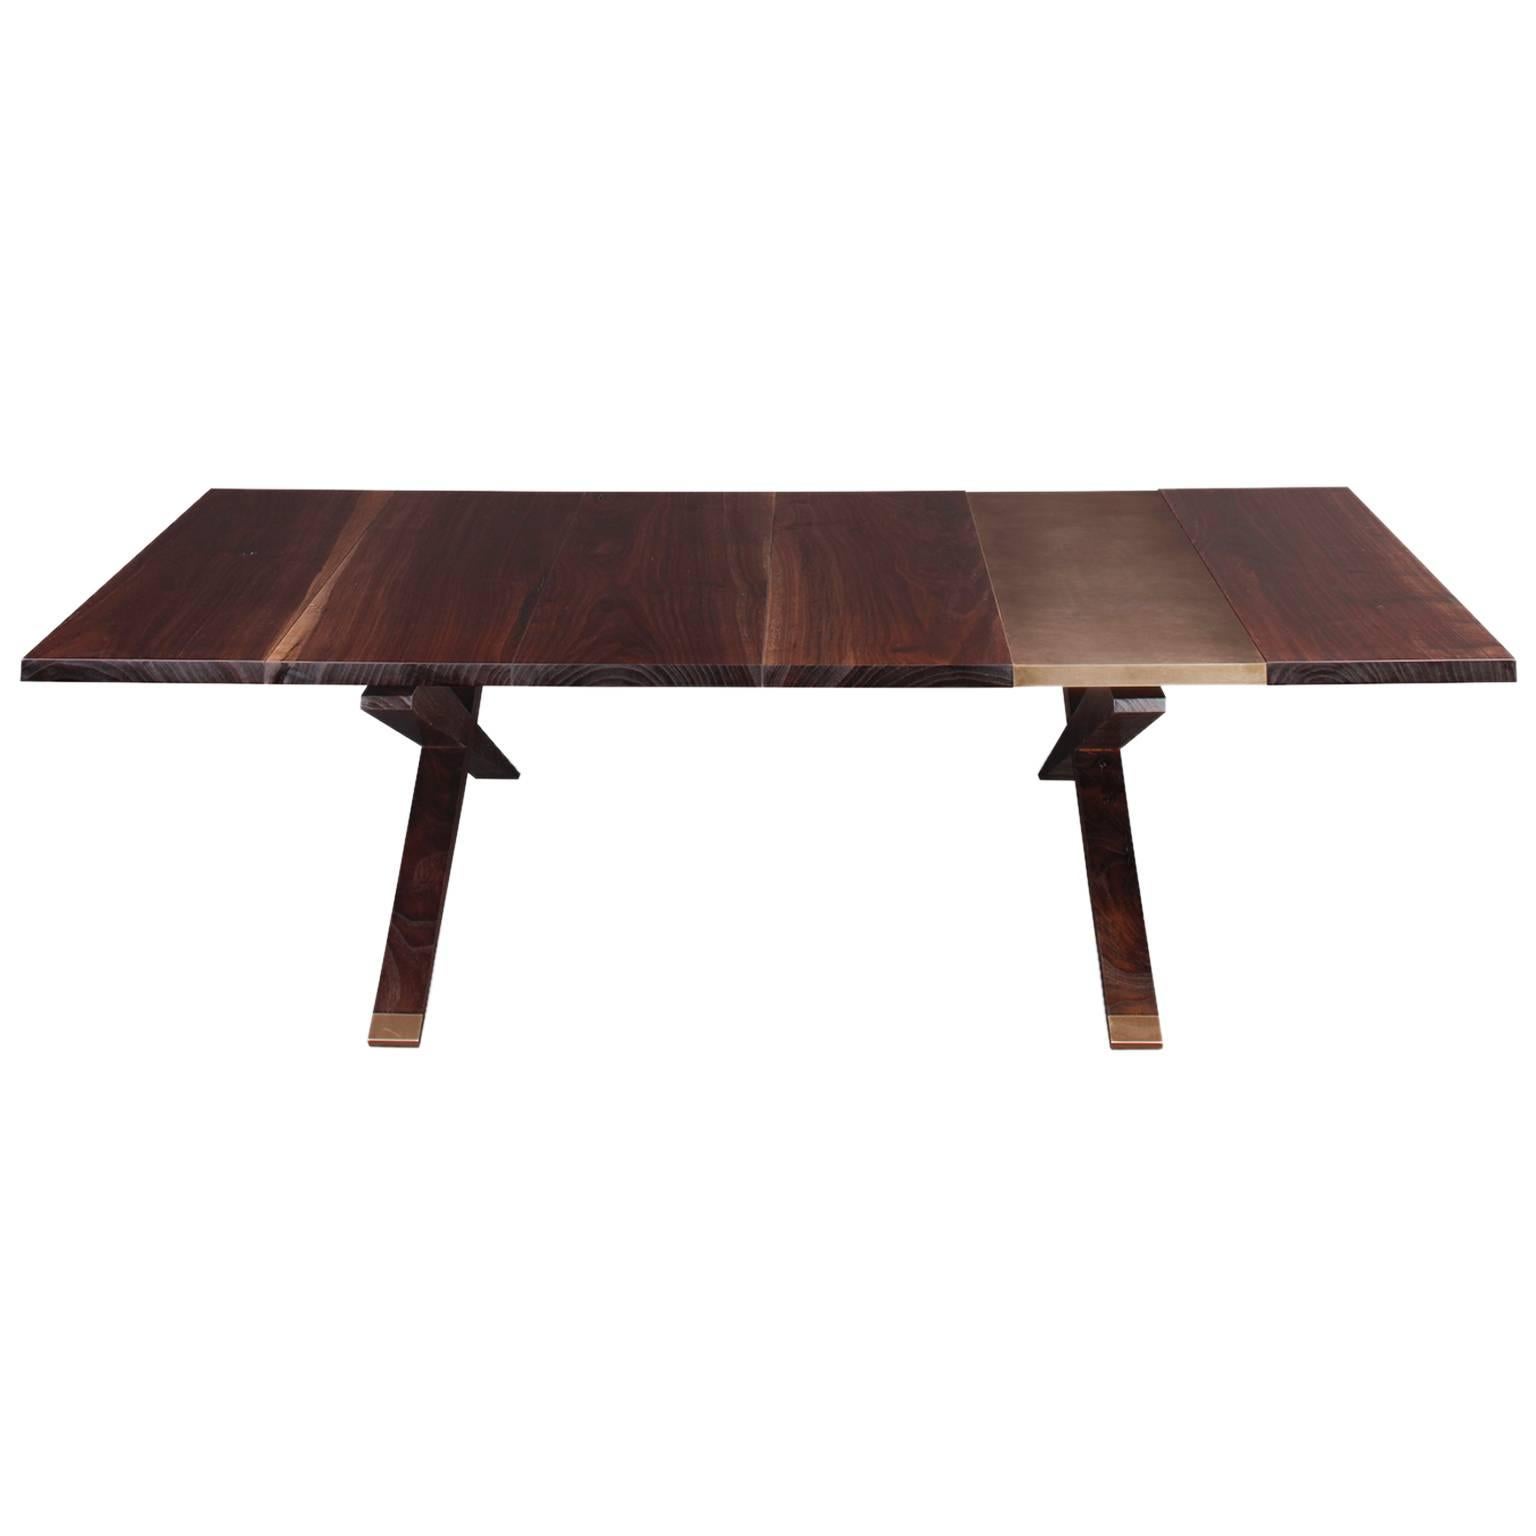 "Hollywood" Coffee Table in Smoked Walnut and Etched Bronze by Studio Roeper